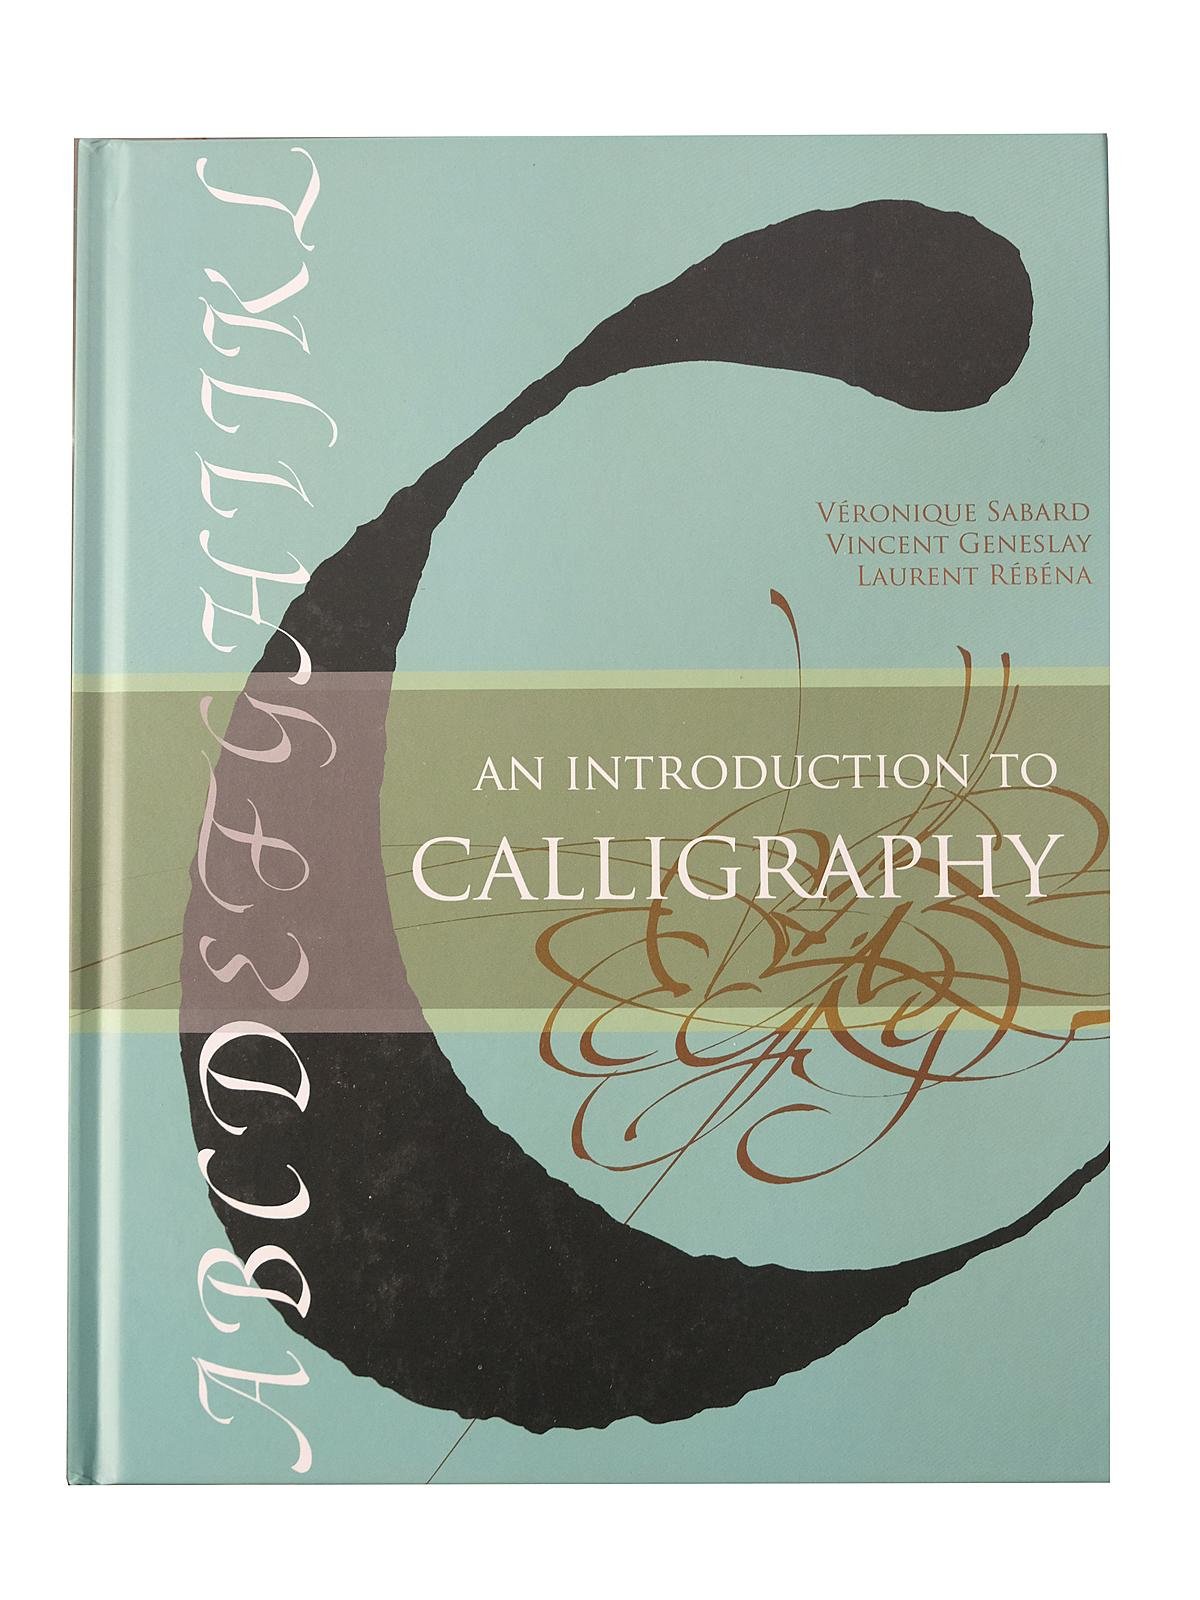 Schiffer - An Introduction to Calligraphy